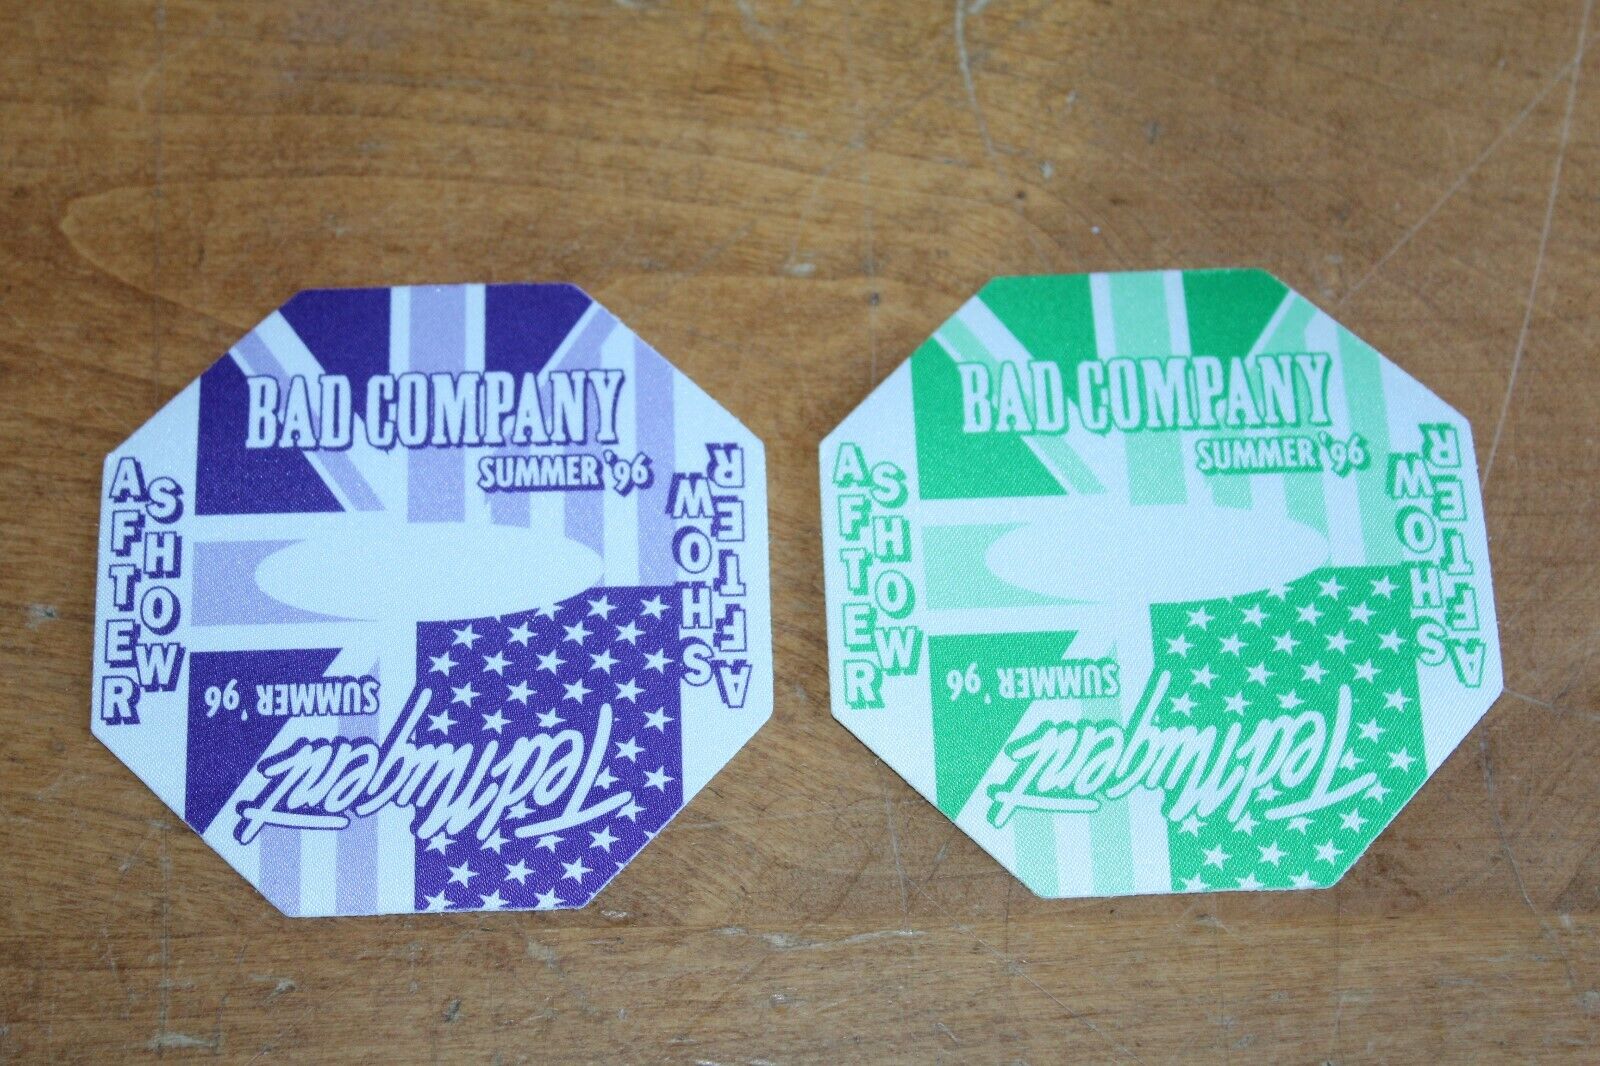 Super sale period limited Ted Nugent Bad Company 5 ☆ very popular - 2 x F Lot # 4 Backstage Pass unused